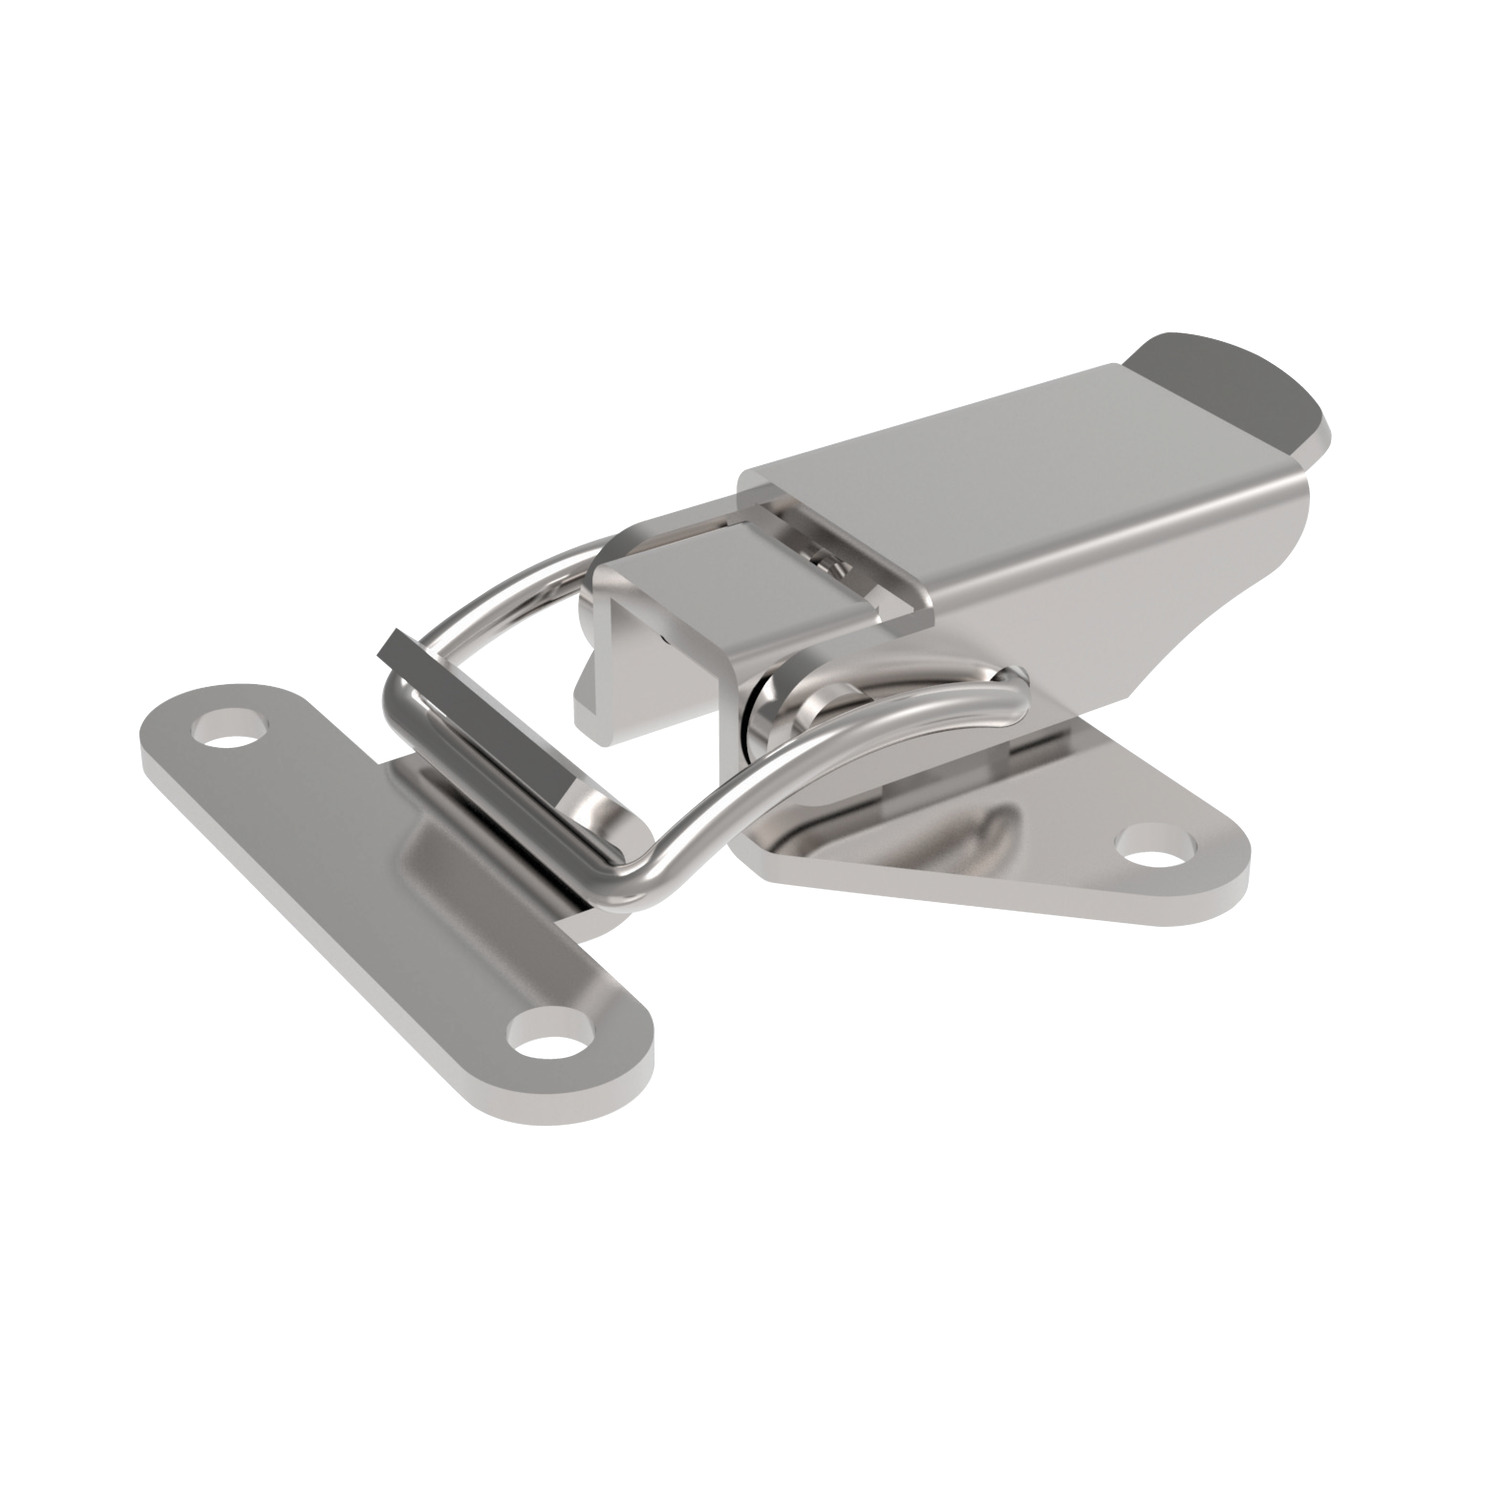 Toggle Latches Steel and stainless steel toggle latches. Sold in multiples of 5 and with counter strike.